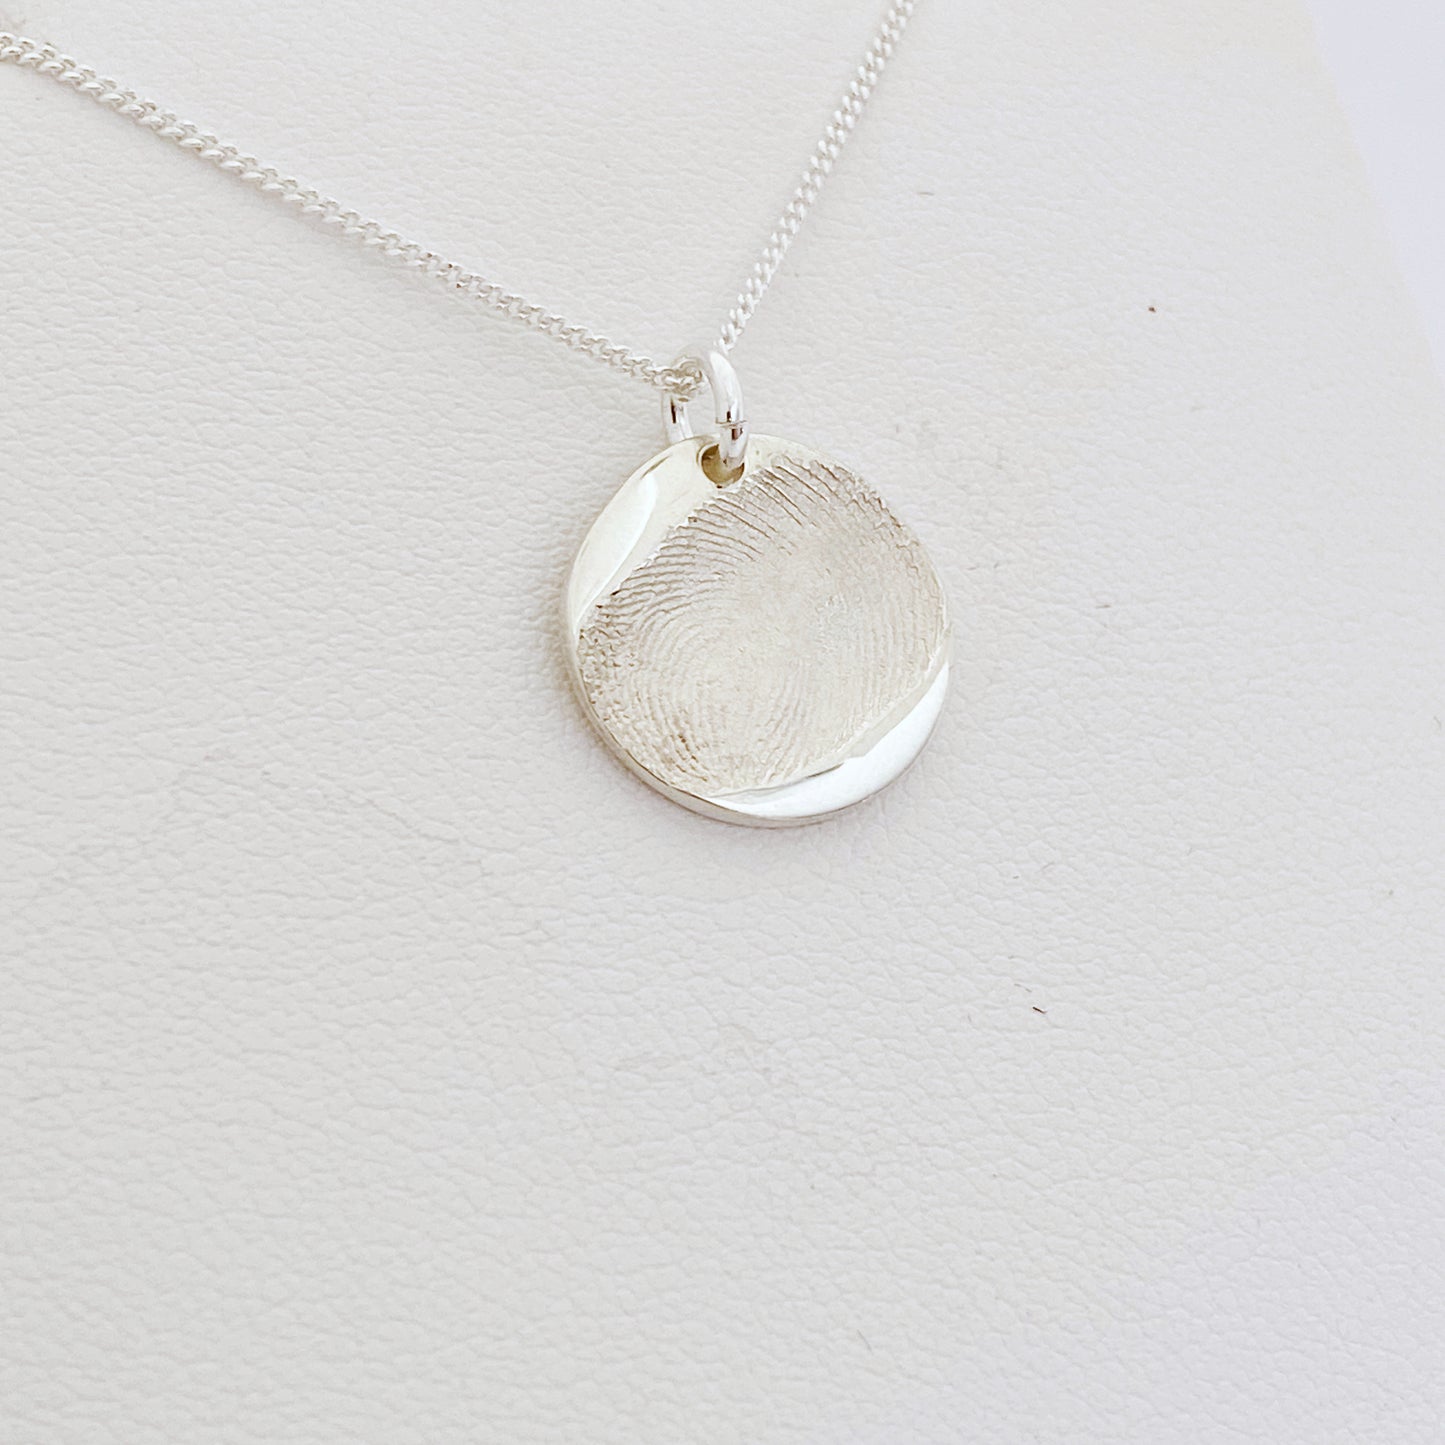 sterling silver fingerprint pendant with gold options, handmade in new zealand